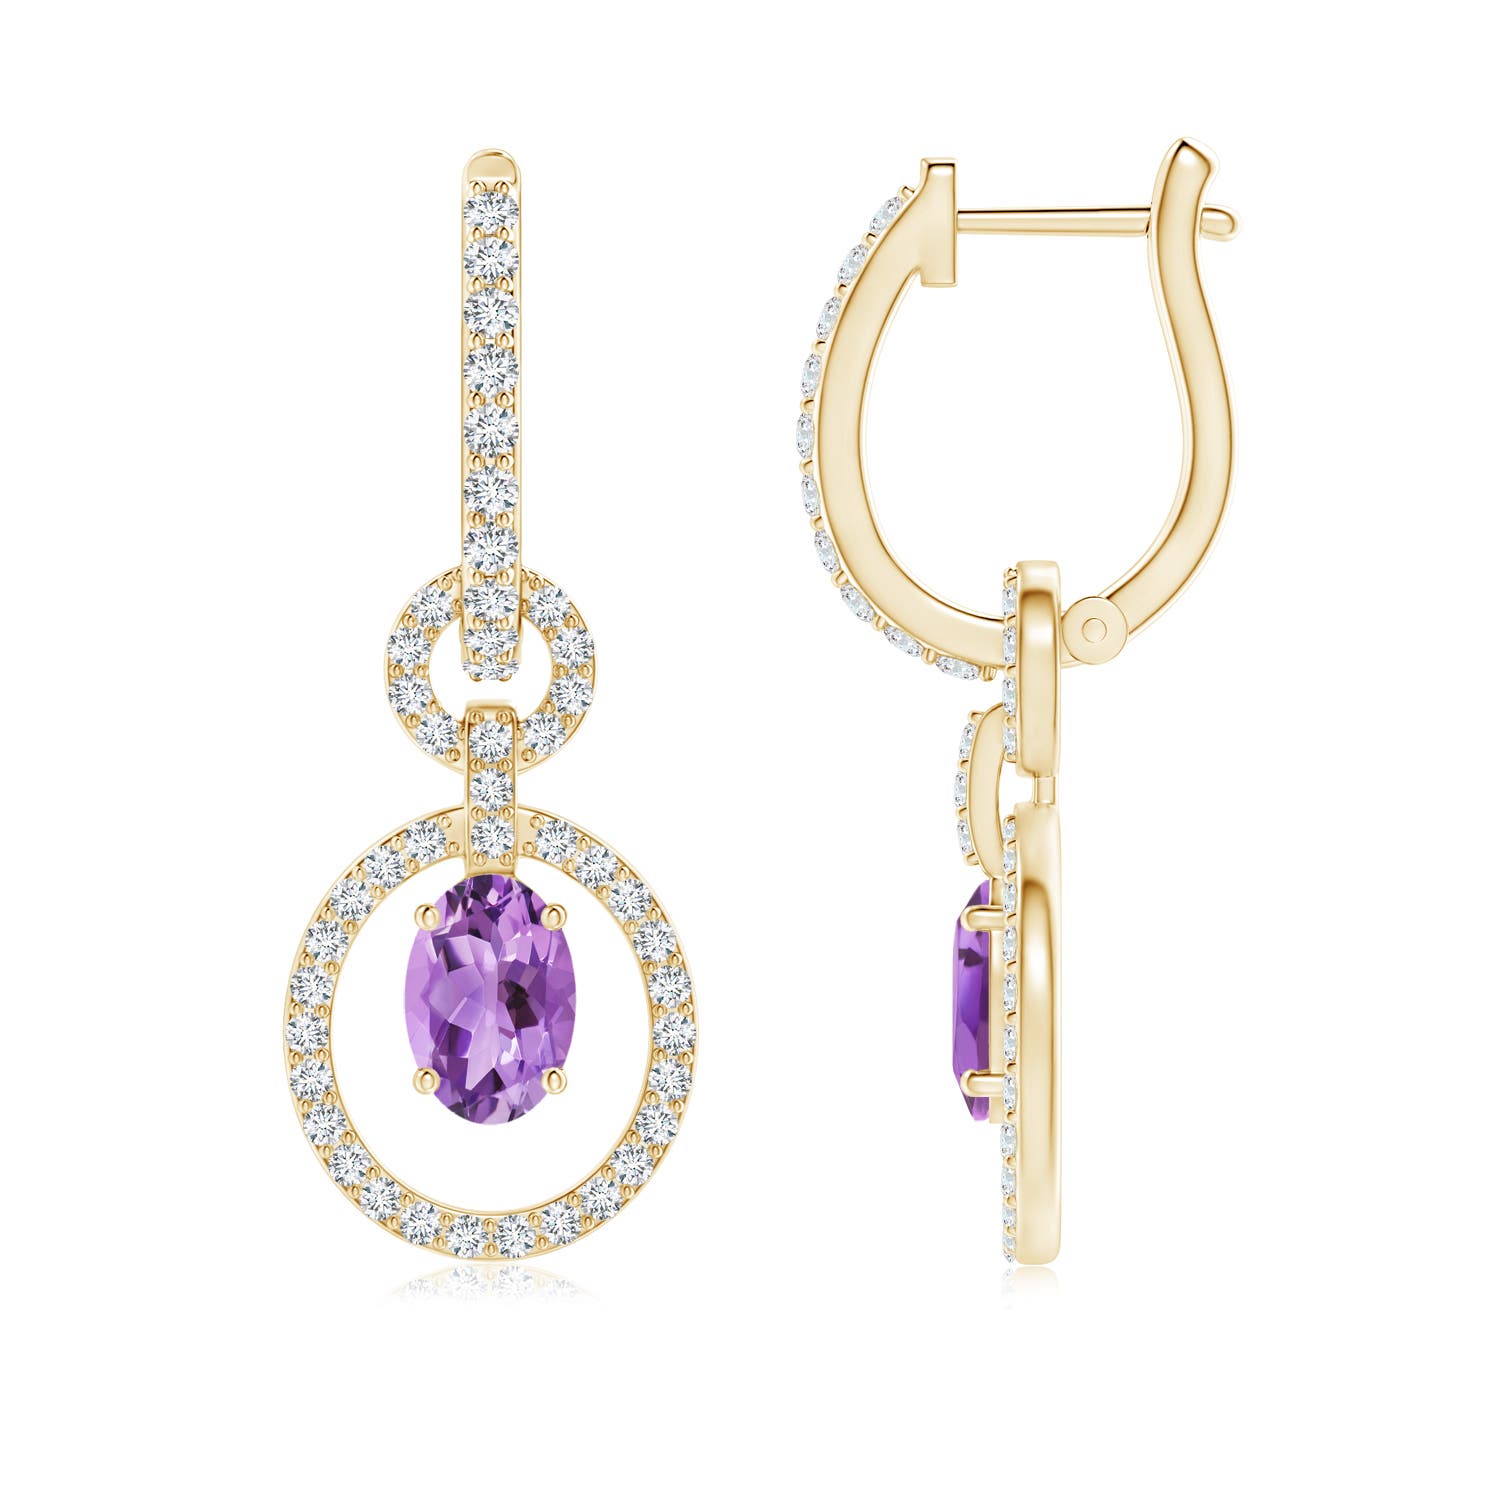 A - Amethyst / 1.35 CT / 14 KT Yellow Gold